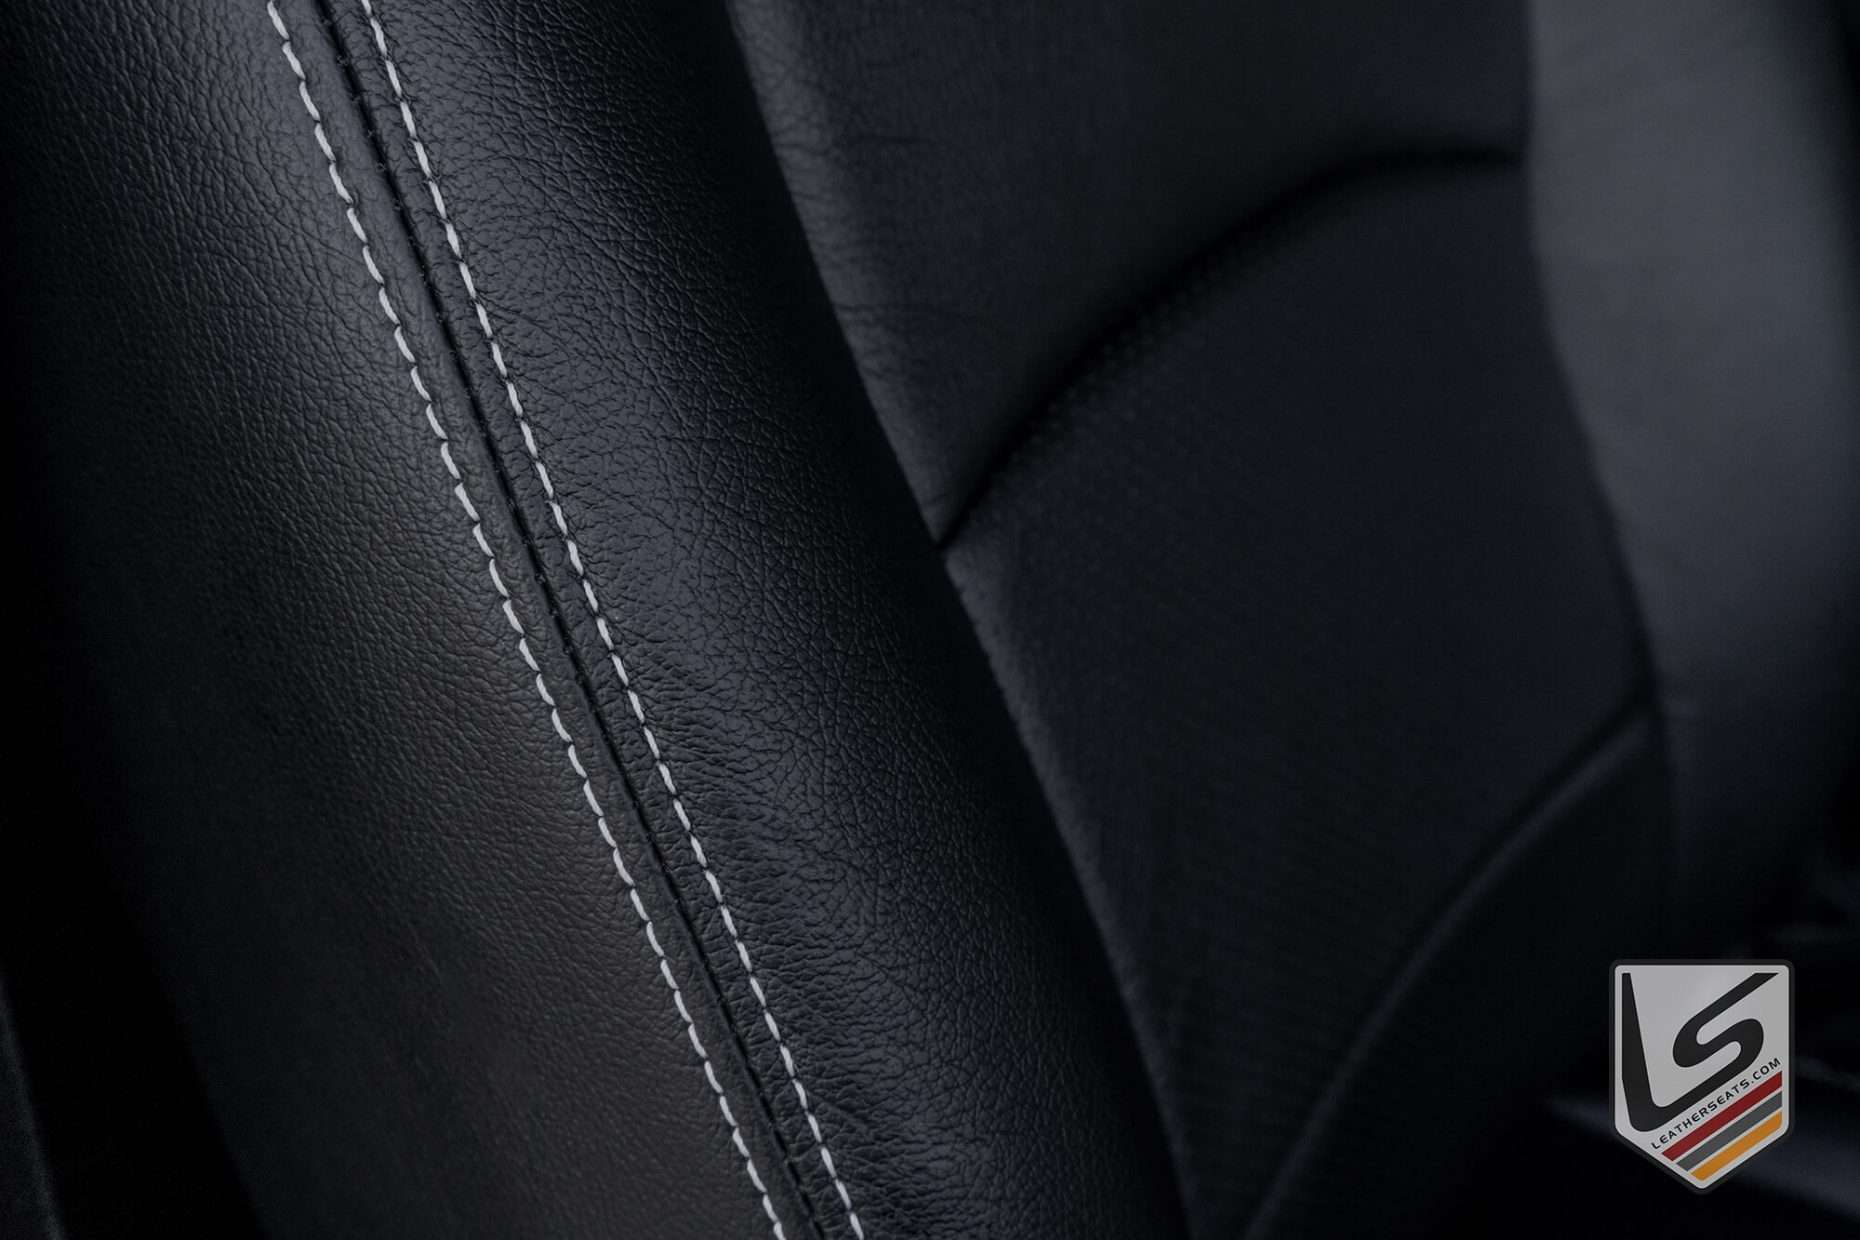 Contrasting White double-stitching on Black leather